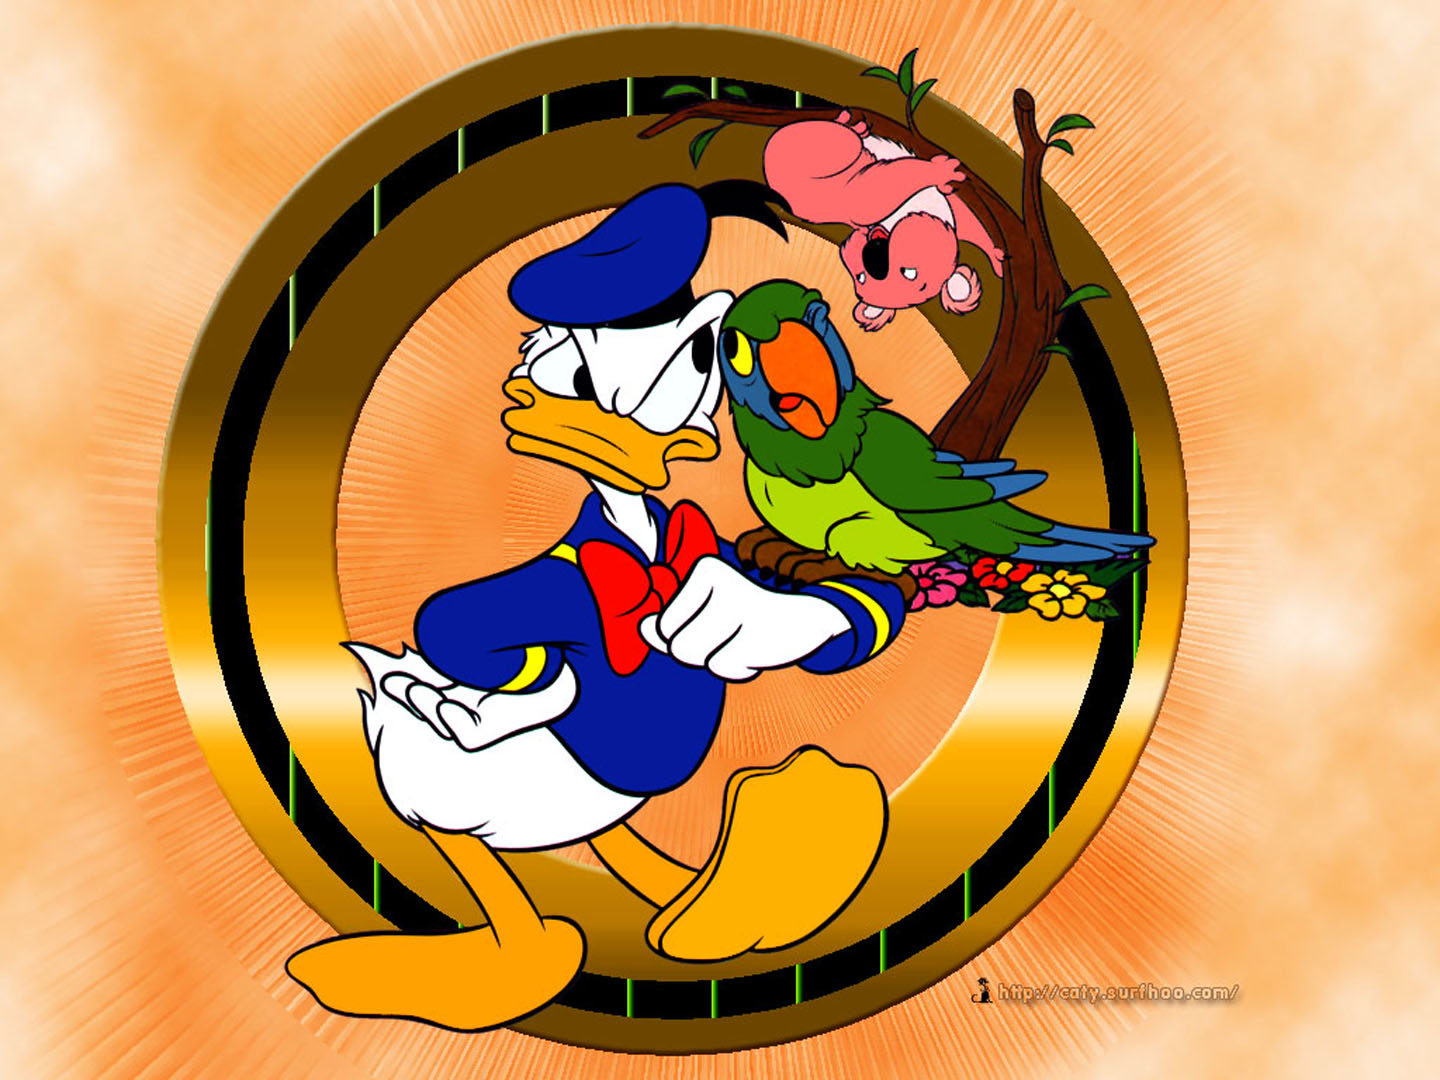 Donald Duck And Parrot - Donald Duck With Parrot - HD Wallpaper 